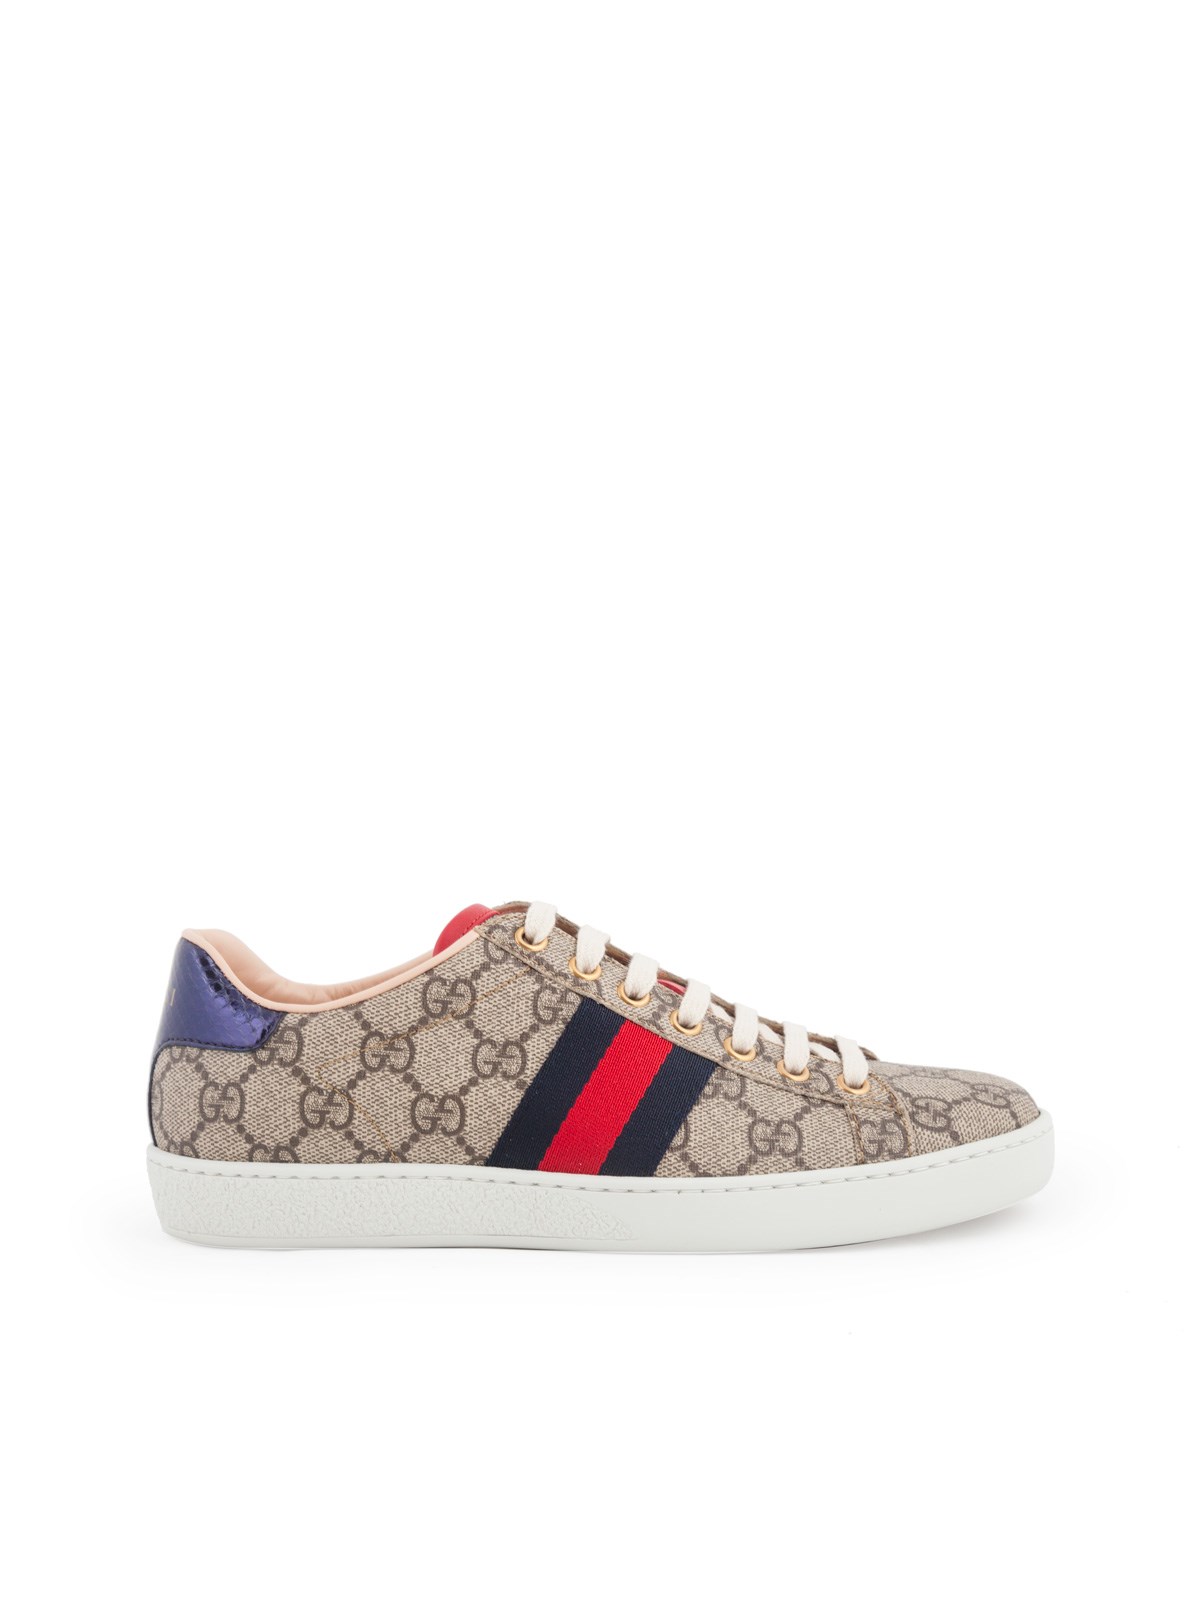 gucci GG SUPREME SNEAKERS available on montiboutique.com - 21266